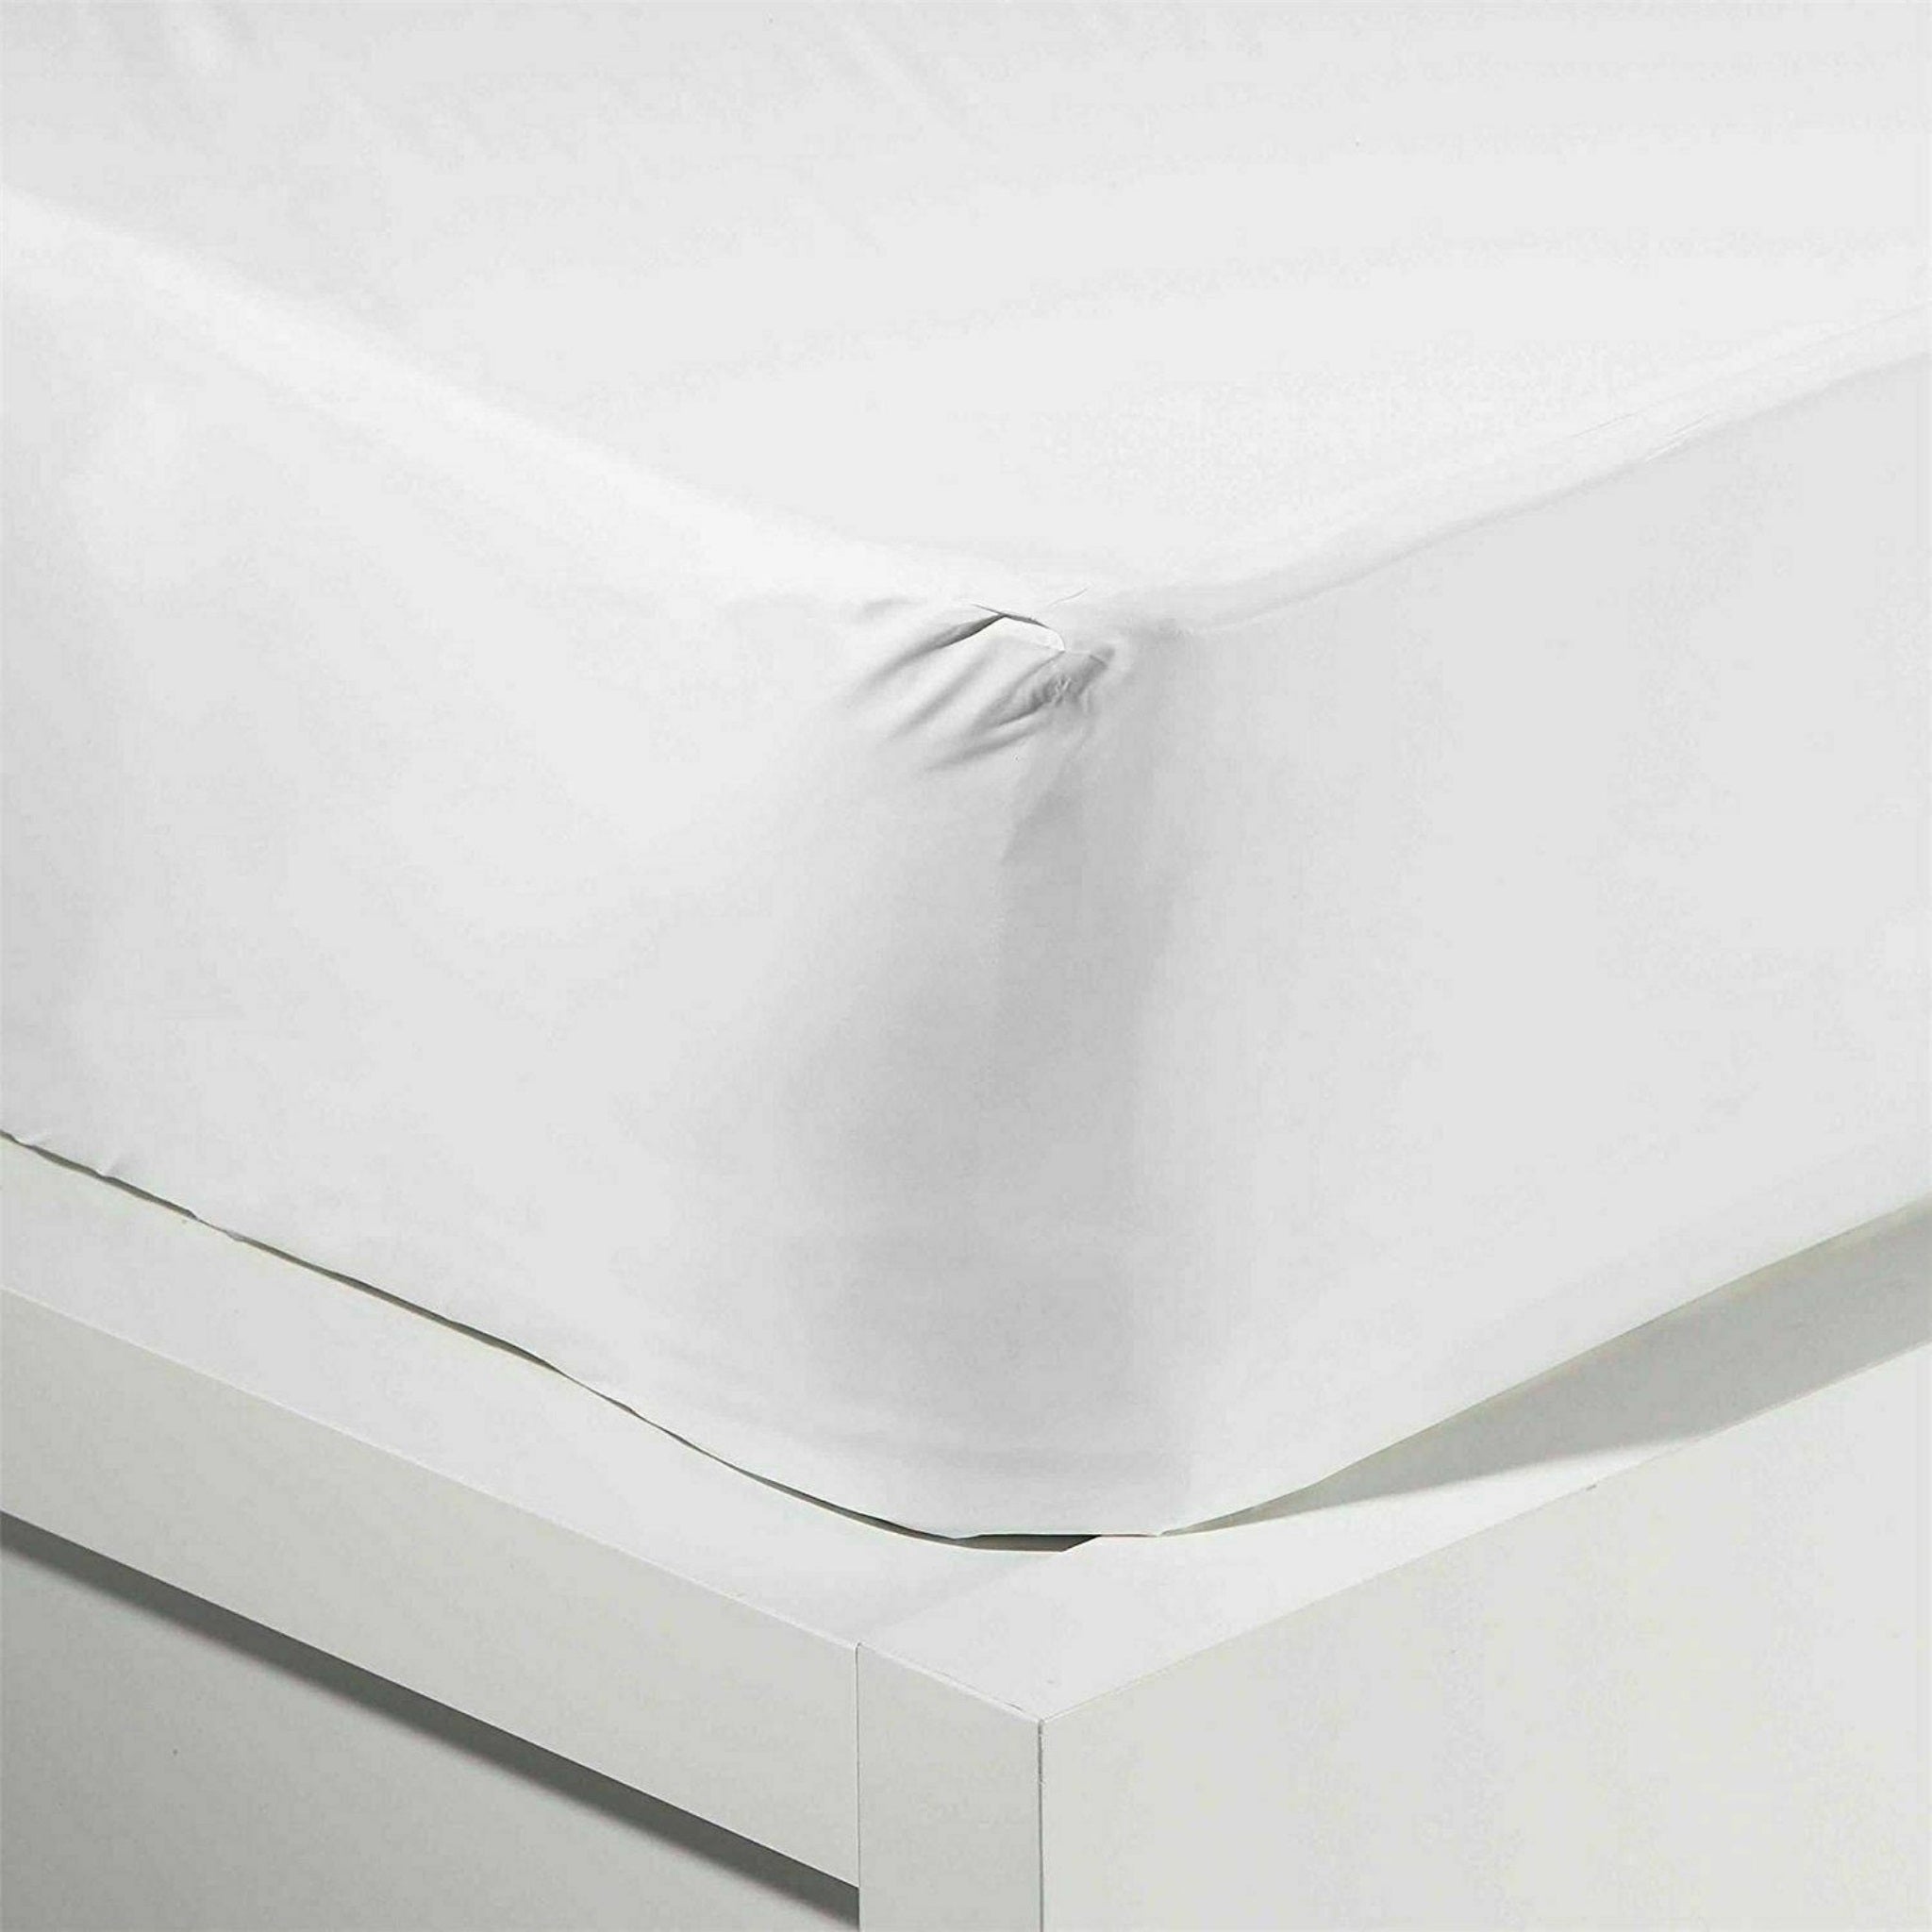 Beclen Harp New Double Waterproof Mattress Protector Anti bed Bug Cover Fitted Wet Sheet Nursery Bedding